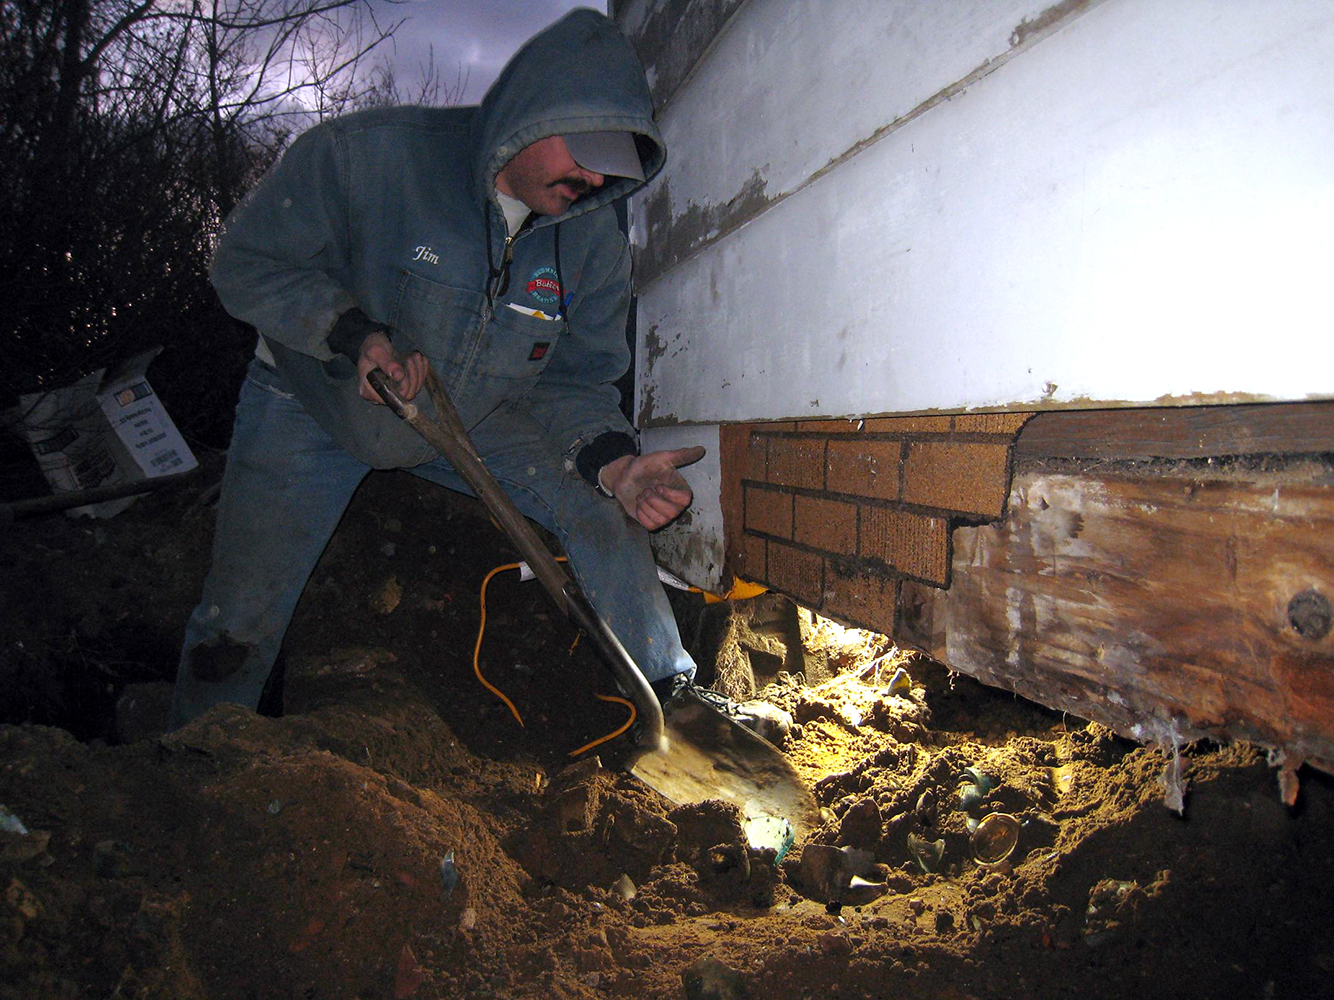 Jim digging beneath the rear addition of the house, shortly after a couple amazing amber blob top sodas were unearthed.